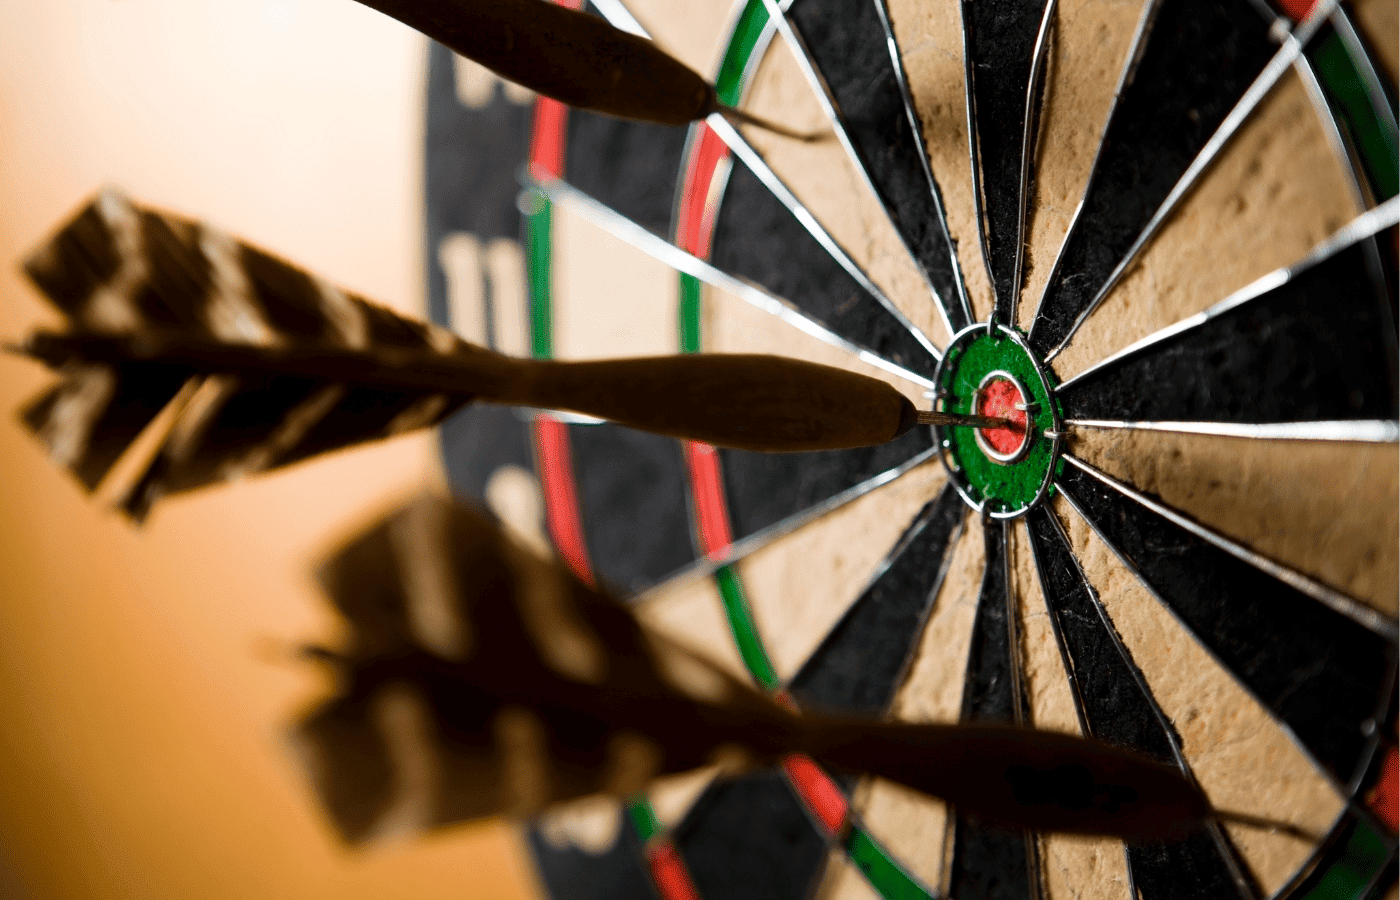 which Darts Does Martijn Kleermaker Use